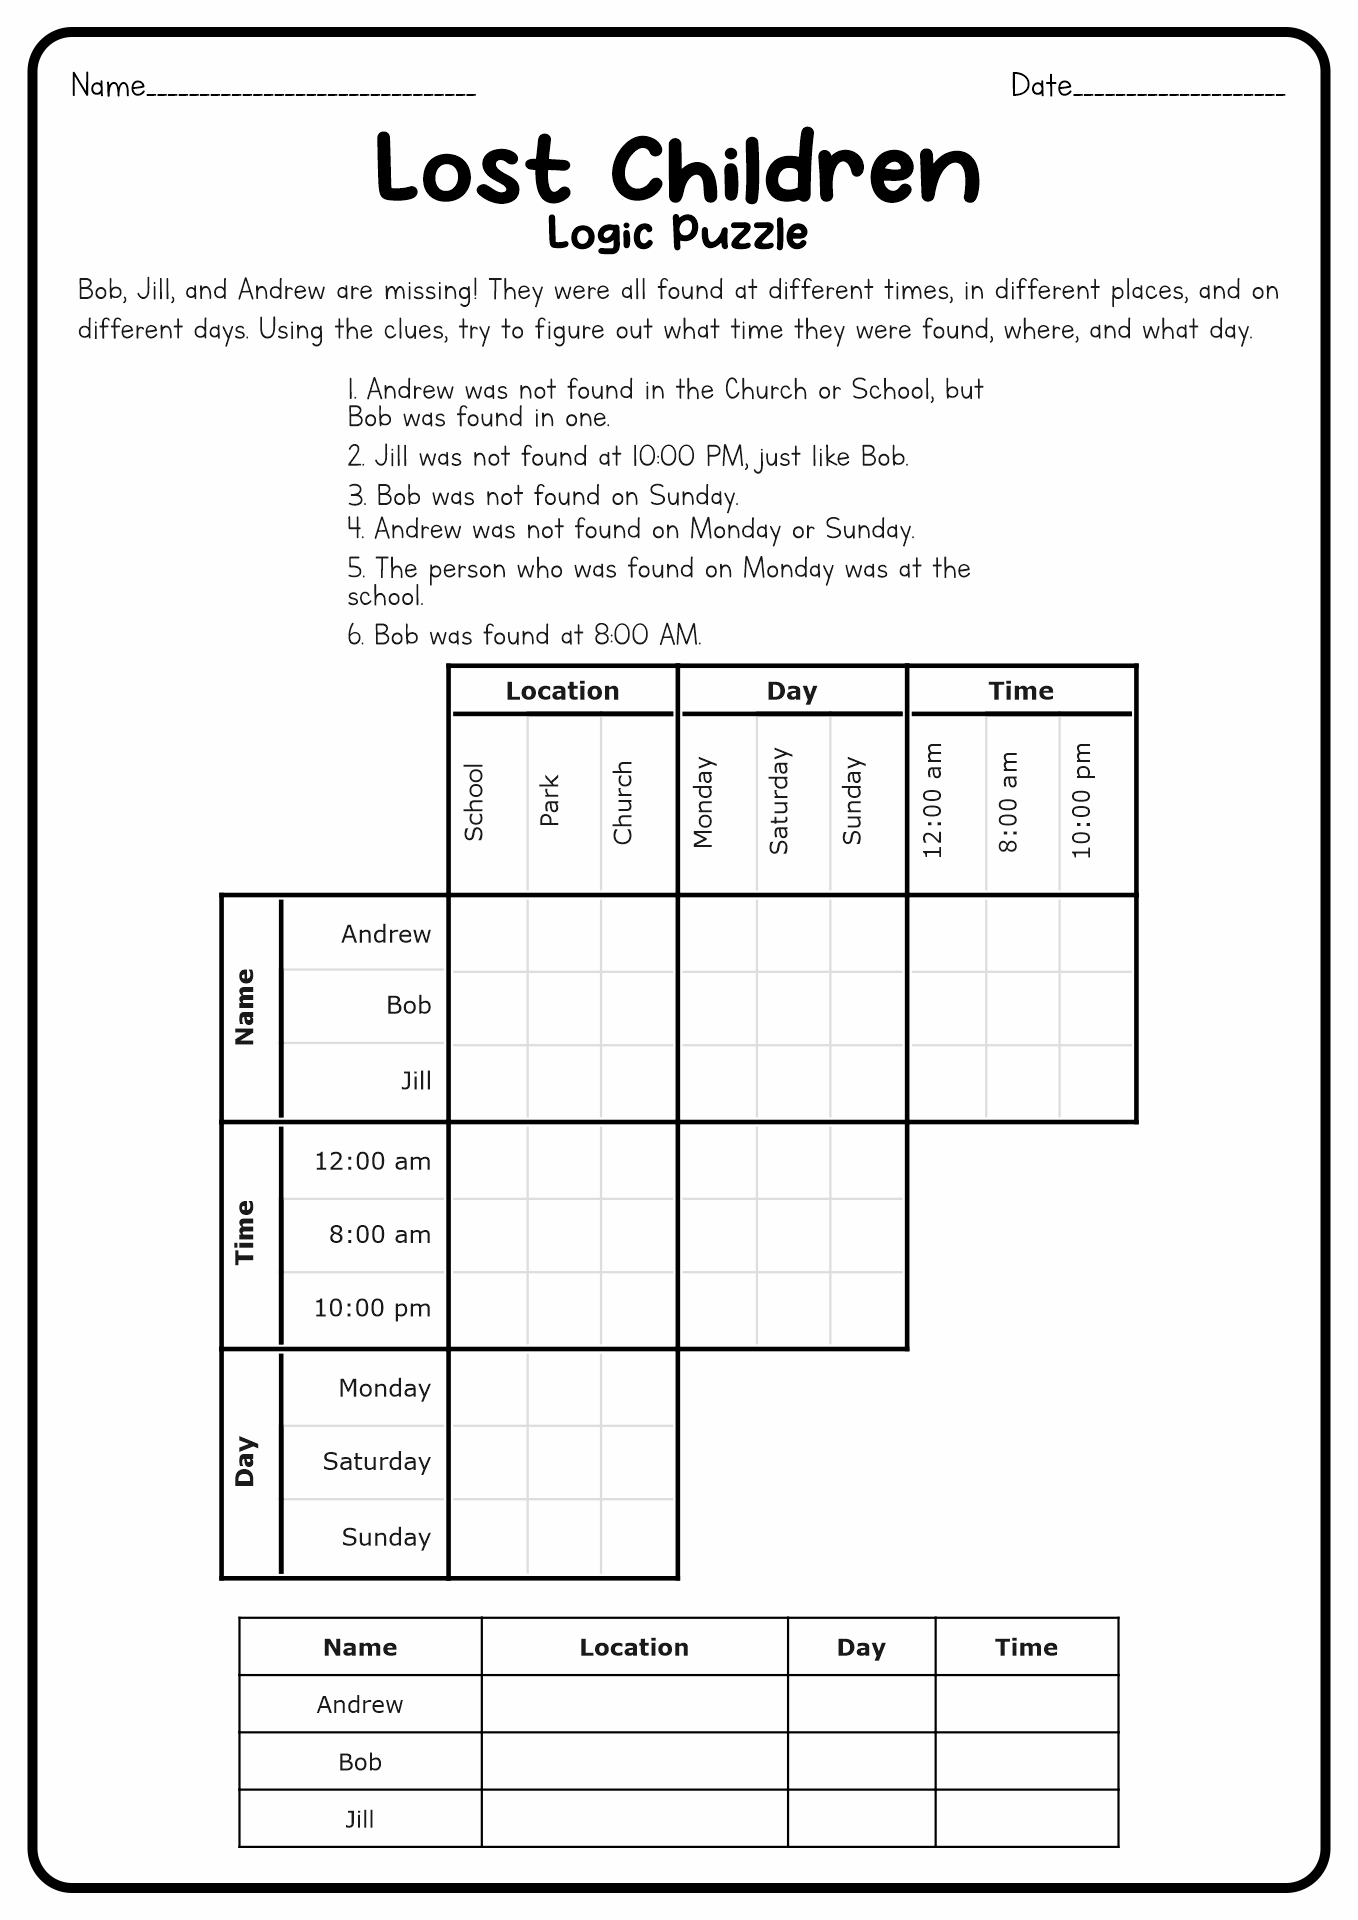 48-logic-puzzles-with-a-spring-theme-in-color-and-black-and-white-answer-key-provided-math